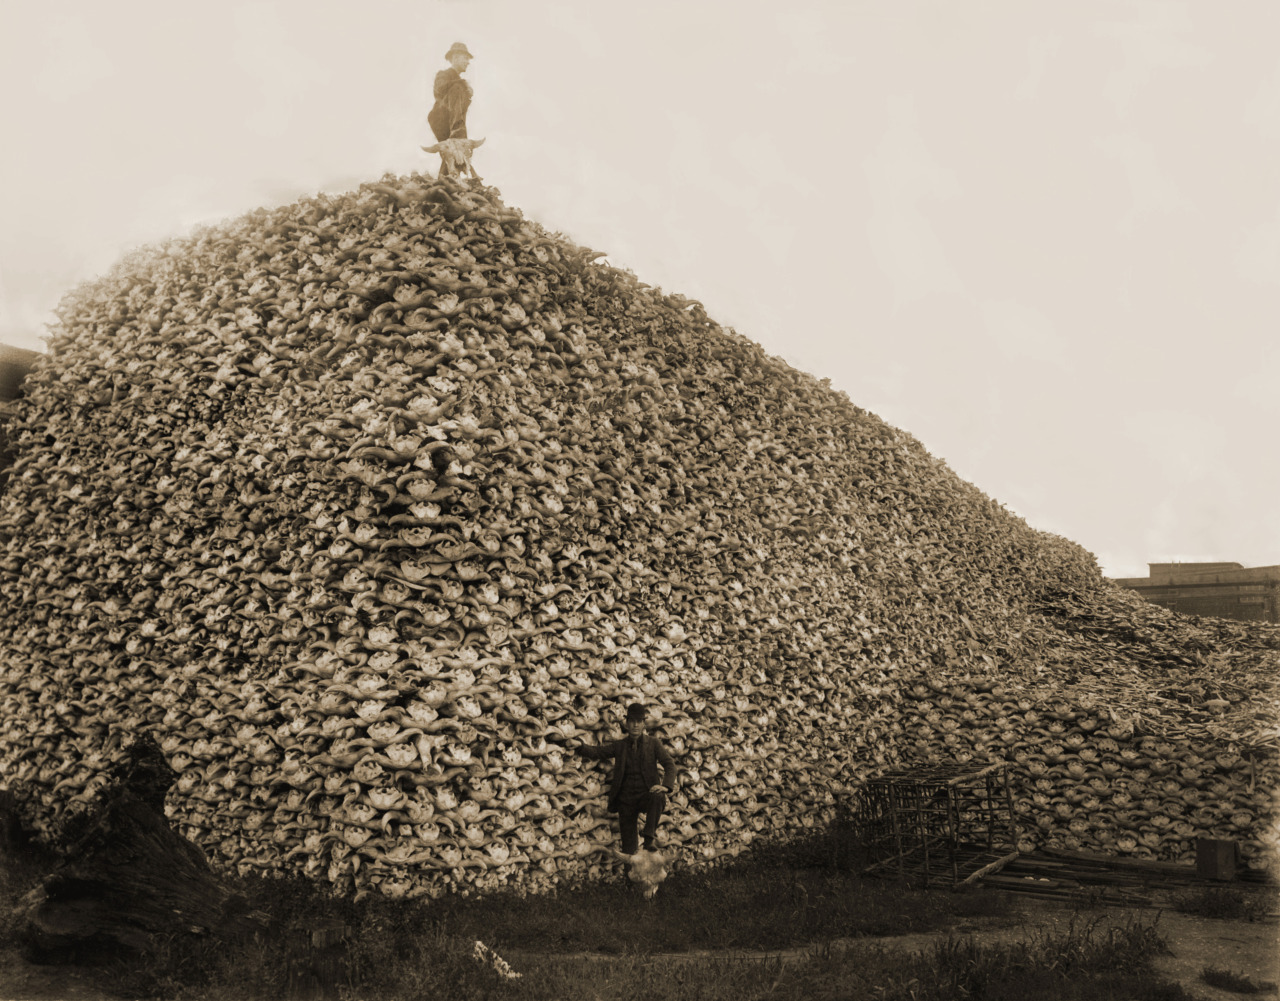 thewriterkb:Buffalo Skulls, 1892 - The American Army, alongside military assisted hunters, rapidly and deliberately destroyed the Buffalo as a Scorched Earth tactic against the Native Americans, from 30-60mil animals to only 300 in 1884. LtCol. Dodge